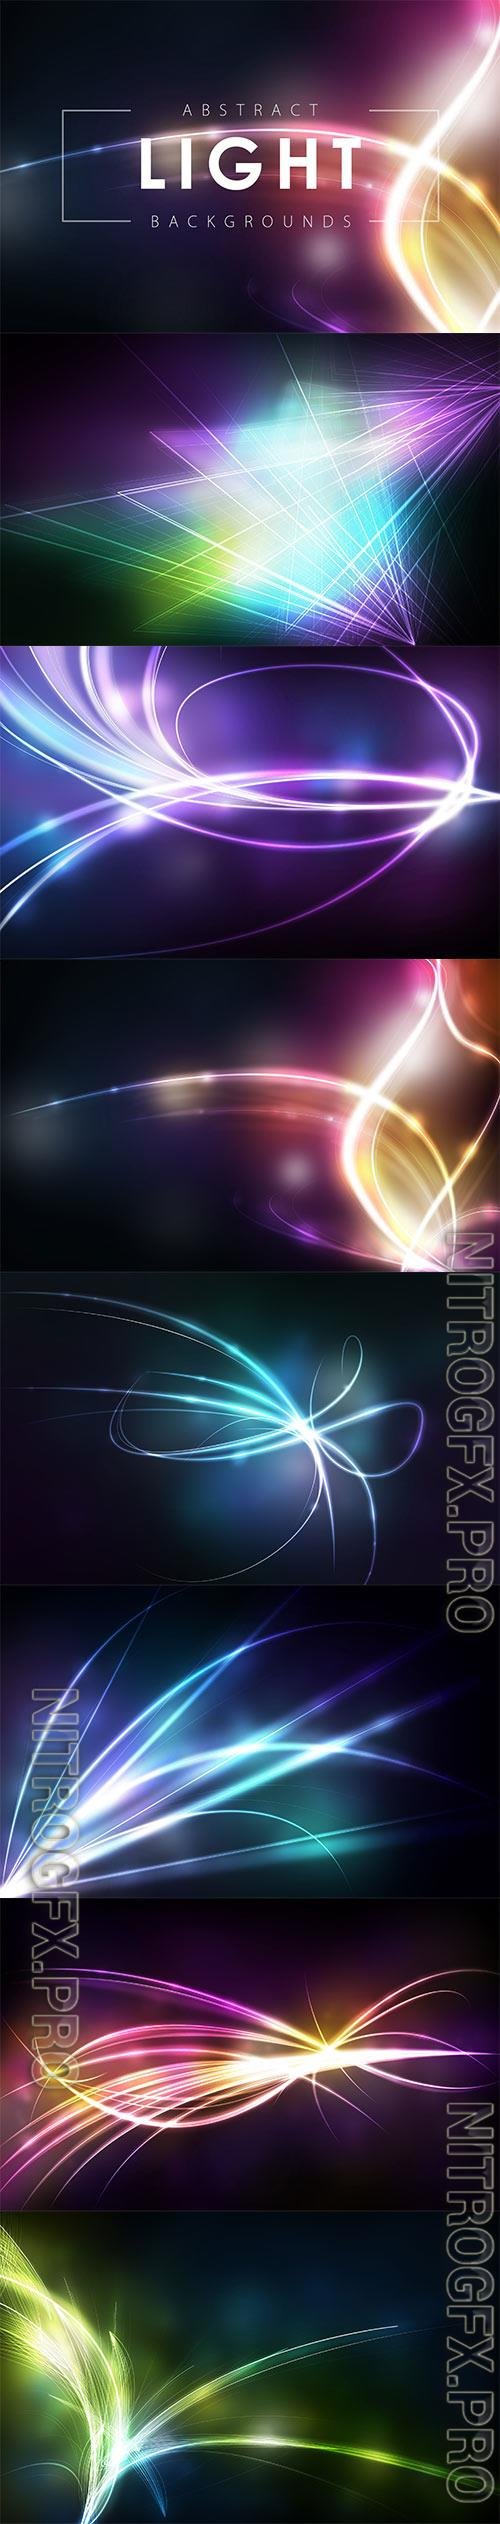 Abstract Dancing Light Backgrounds